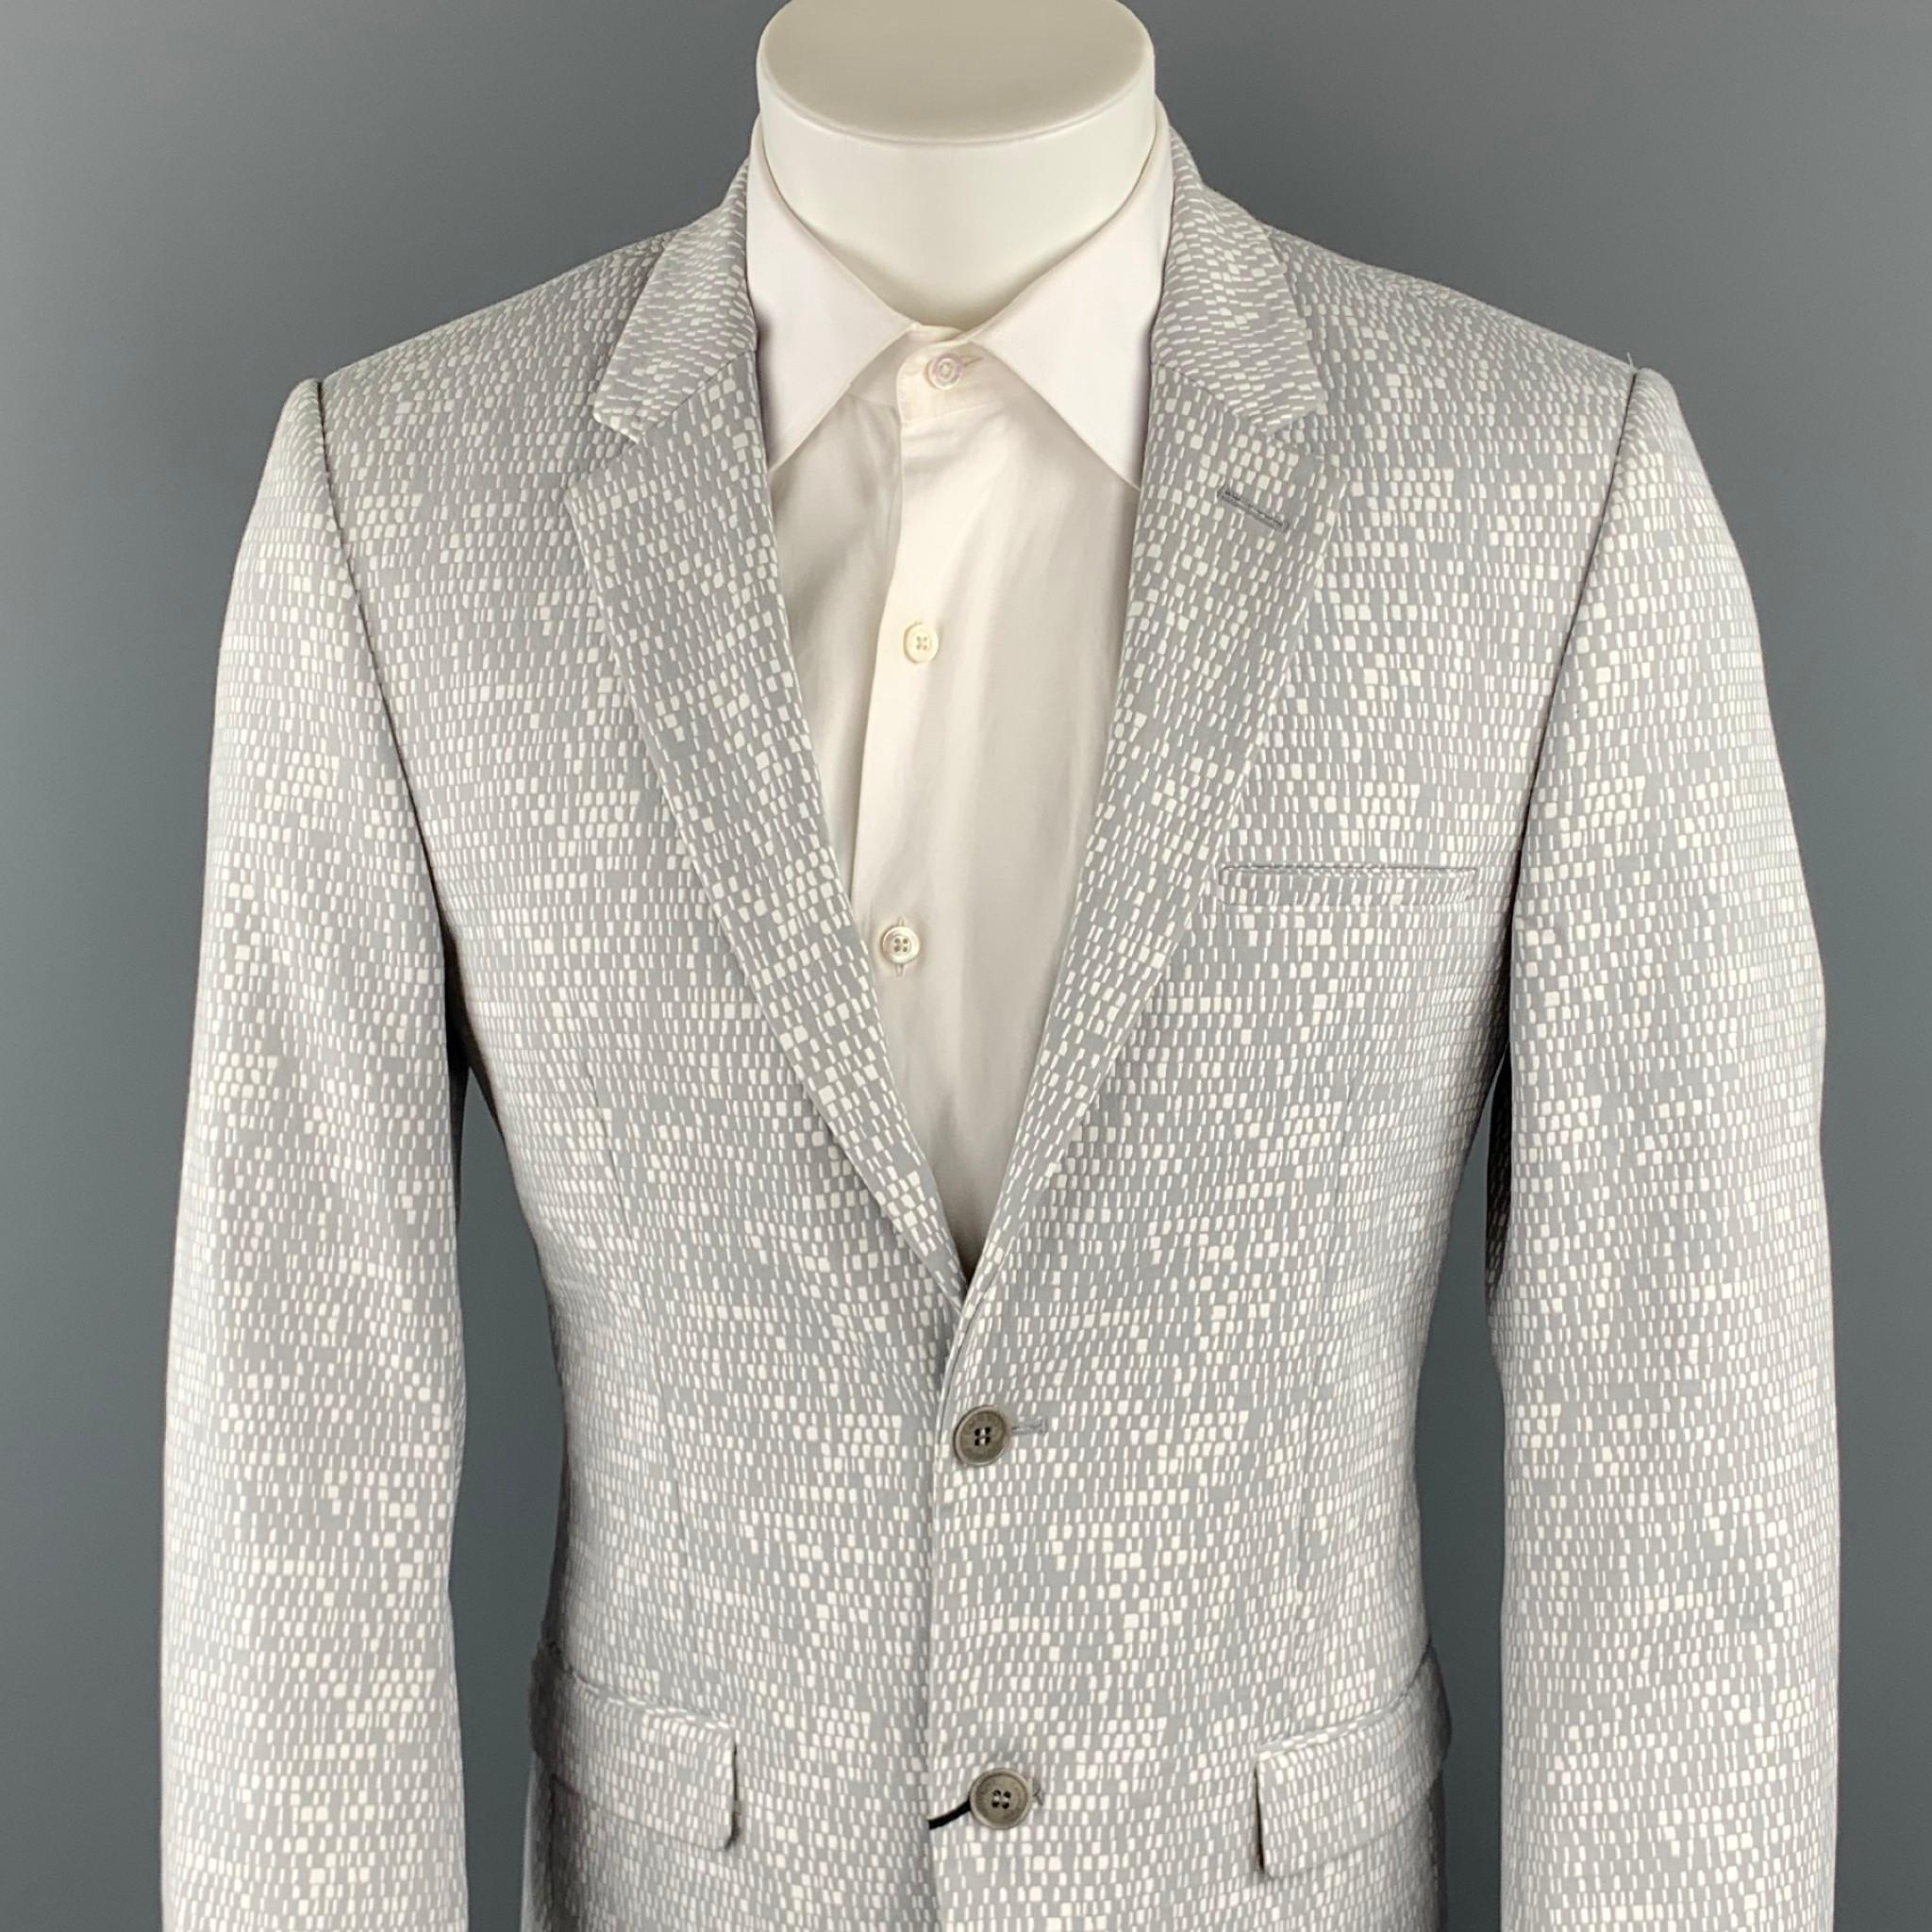 CALVIN KLEIN COLLECTION sport coat comes in a gray & white woven cotton blend with a full liner featuring a notch lapel, flap pockets, and a two button closure.

New With Tags.
Marked: 46/36

Measurements:

Shoulder: 17.5 in. 
Chest: 38 in. 
Sleeve: